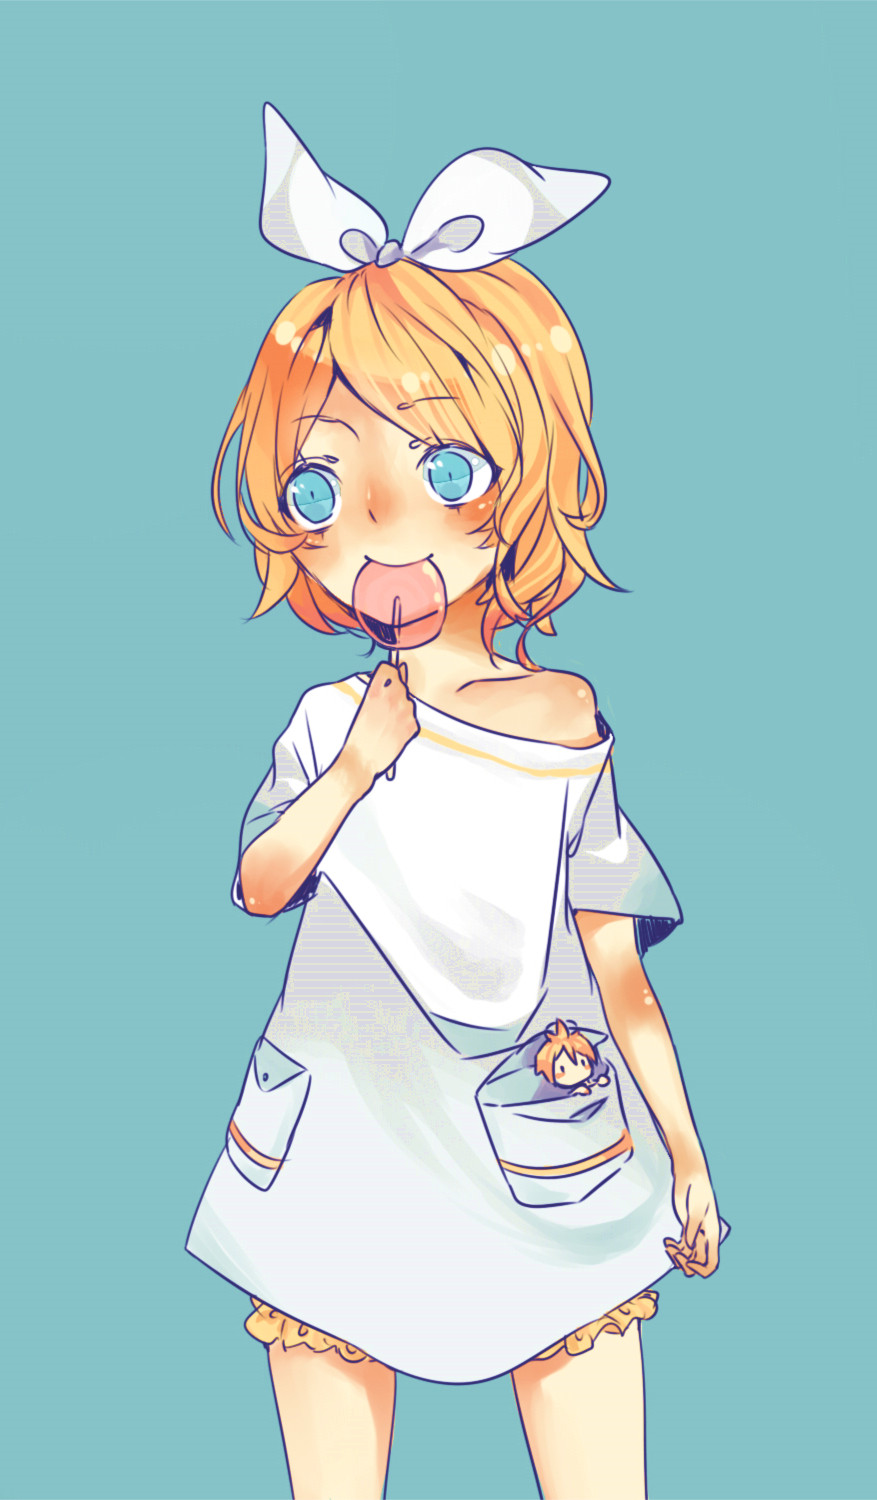 1boy 1girl blonde_hair bloomers blue_eyes bow candy chibi child hair_bow hair_ribbon kagamine_len kagamine_rin lollipop miniboy oversized_clothes ribbon short_hair simple_background underwear vocaloid young younger